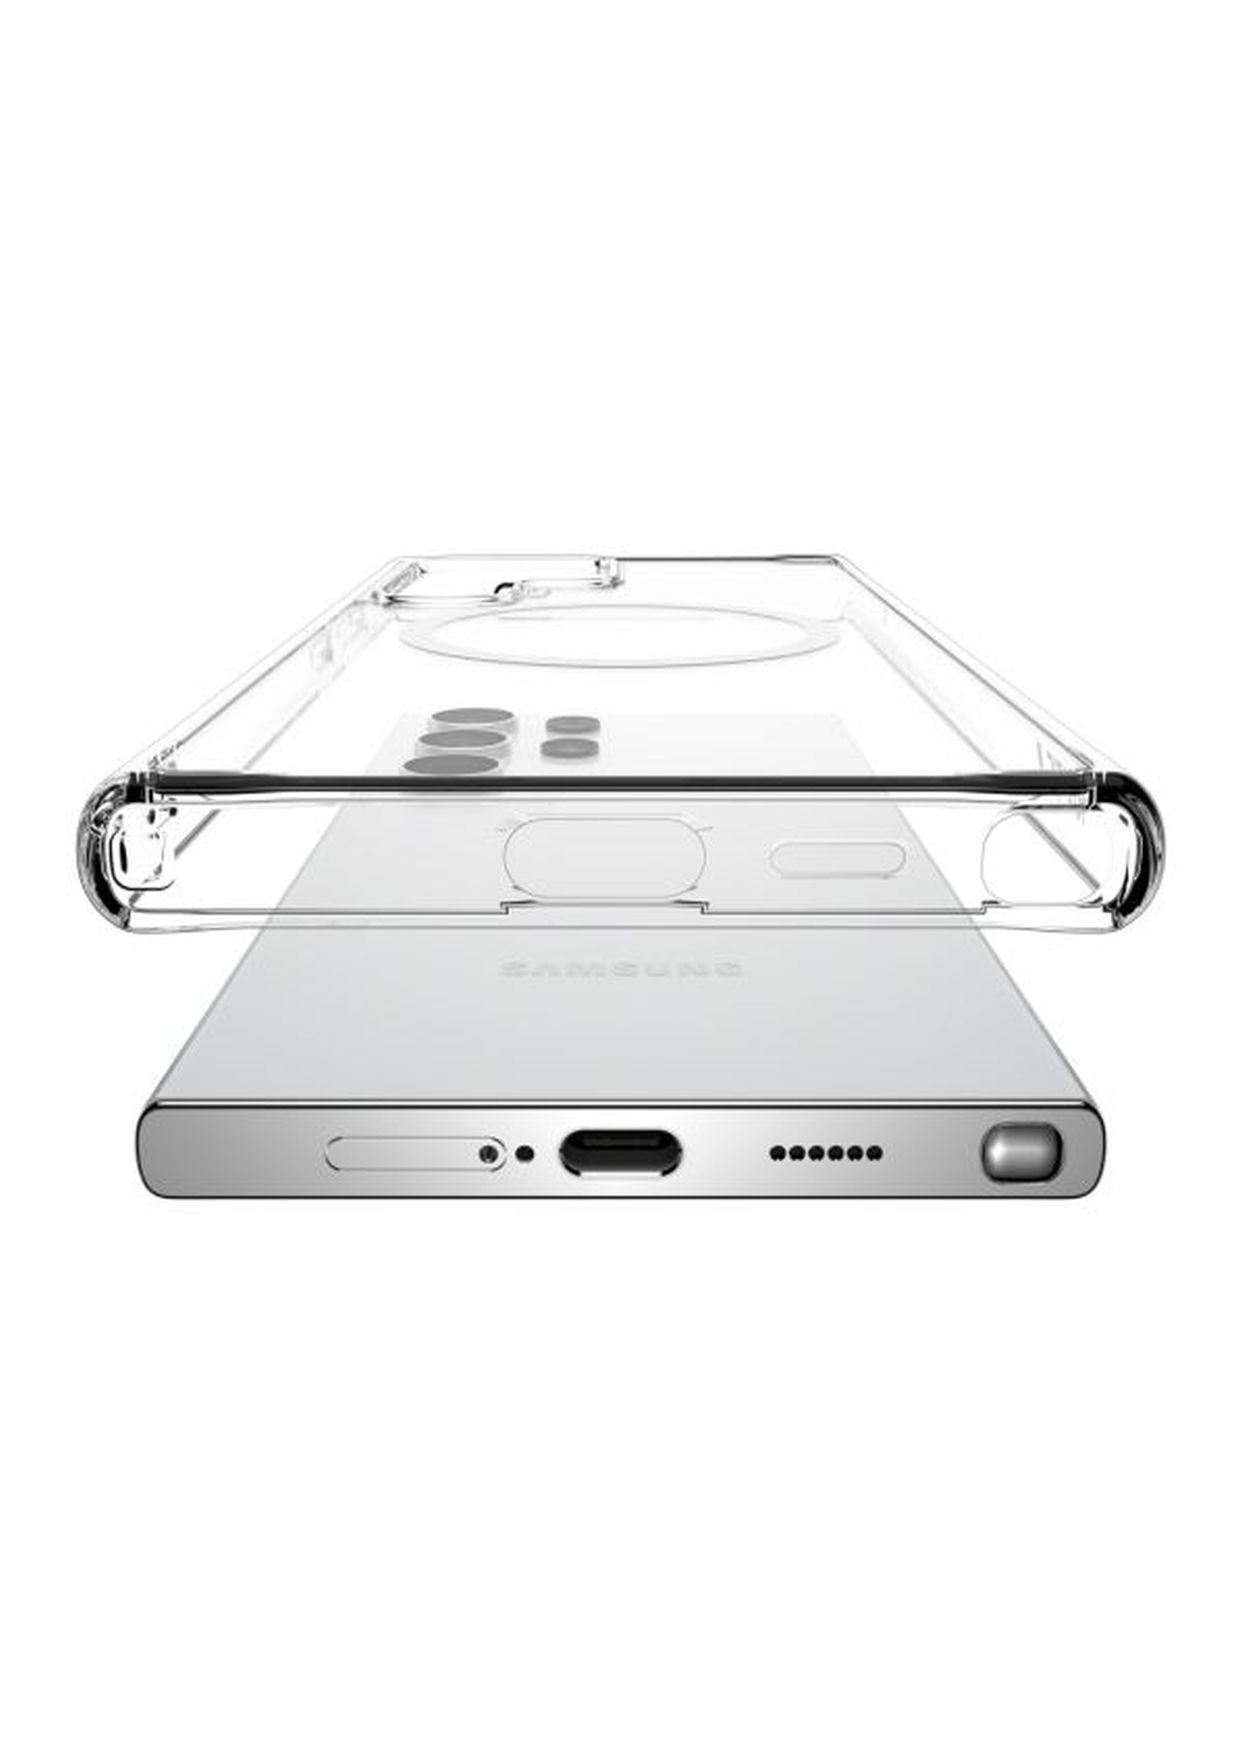 An Raptic CLEAR case displaying a Samsung Galaxy S24 Series - Raptic CLEAR phone.